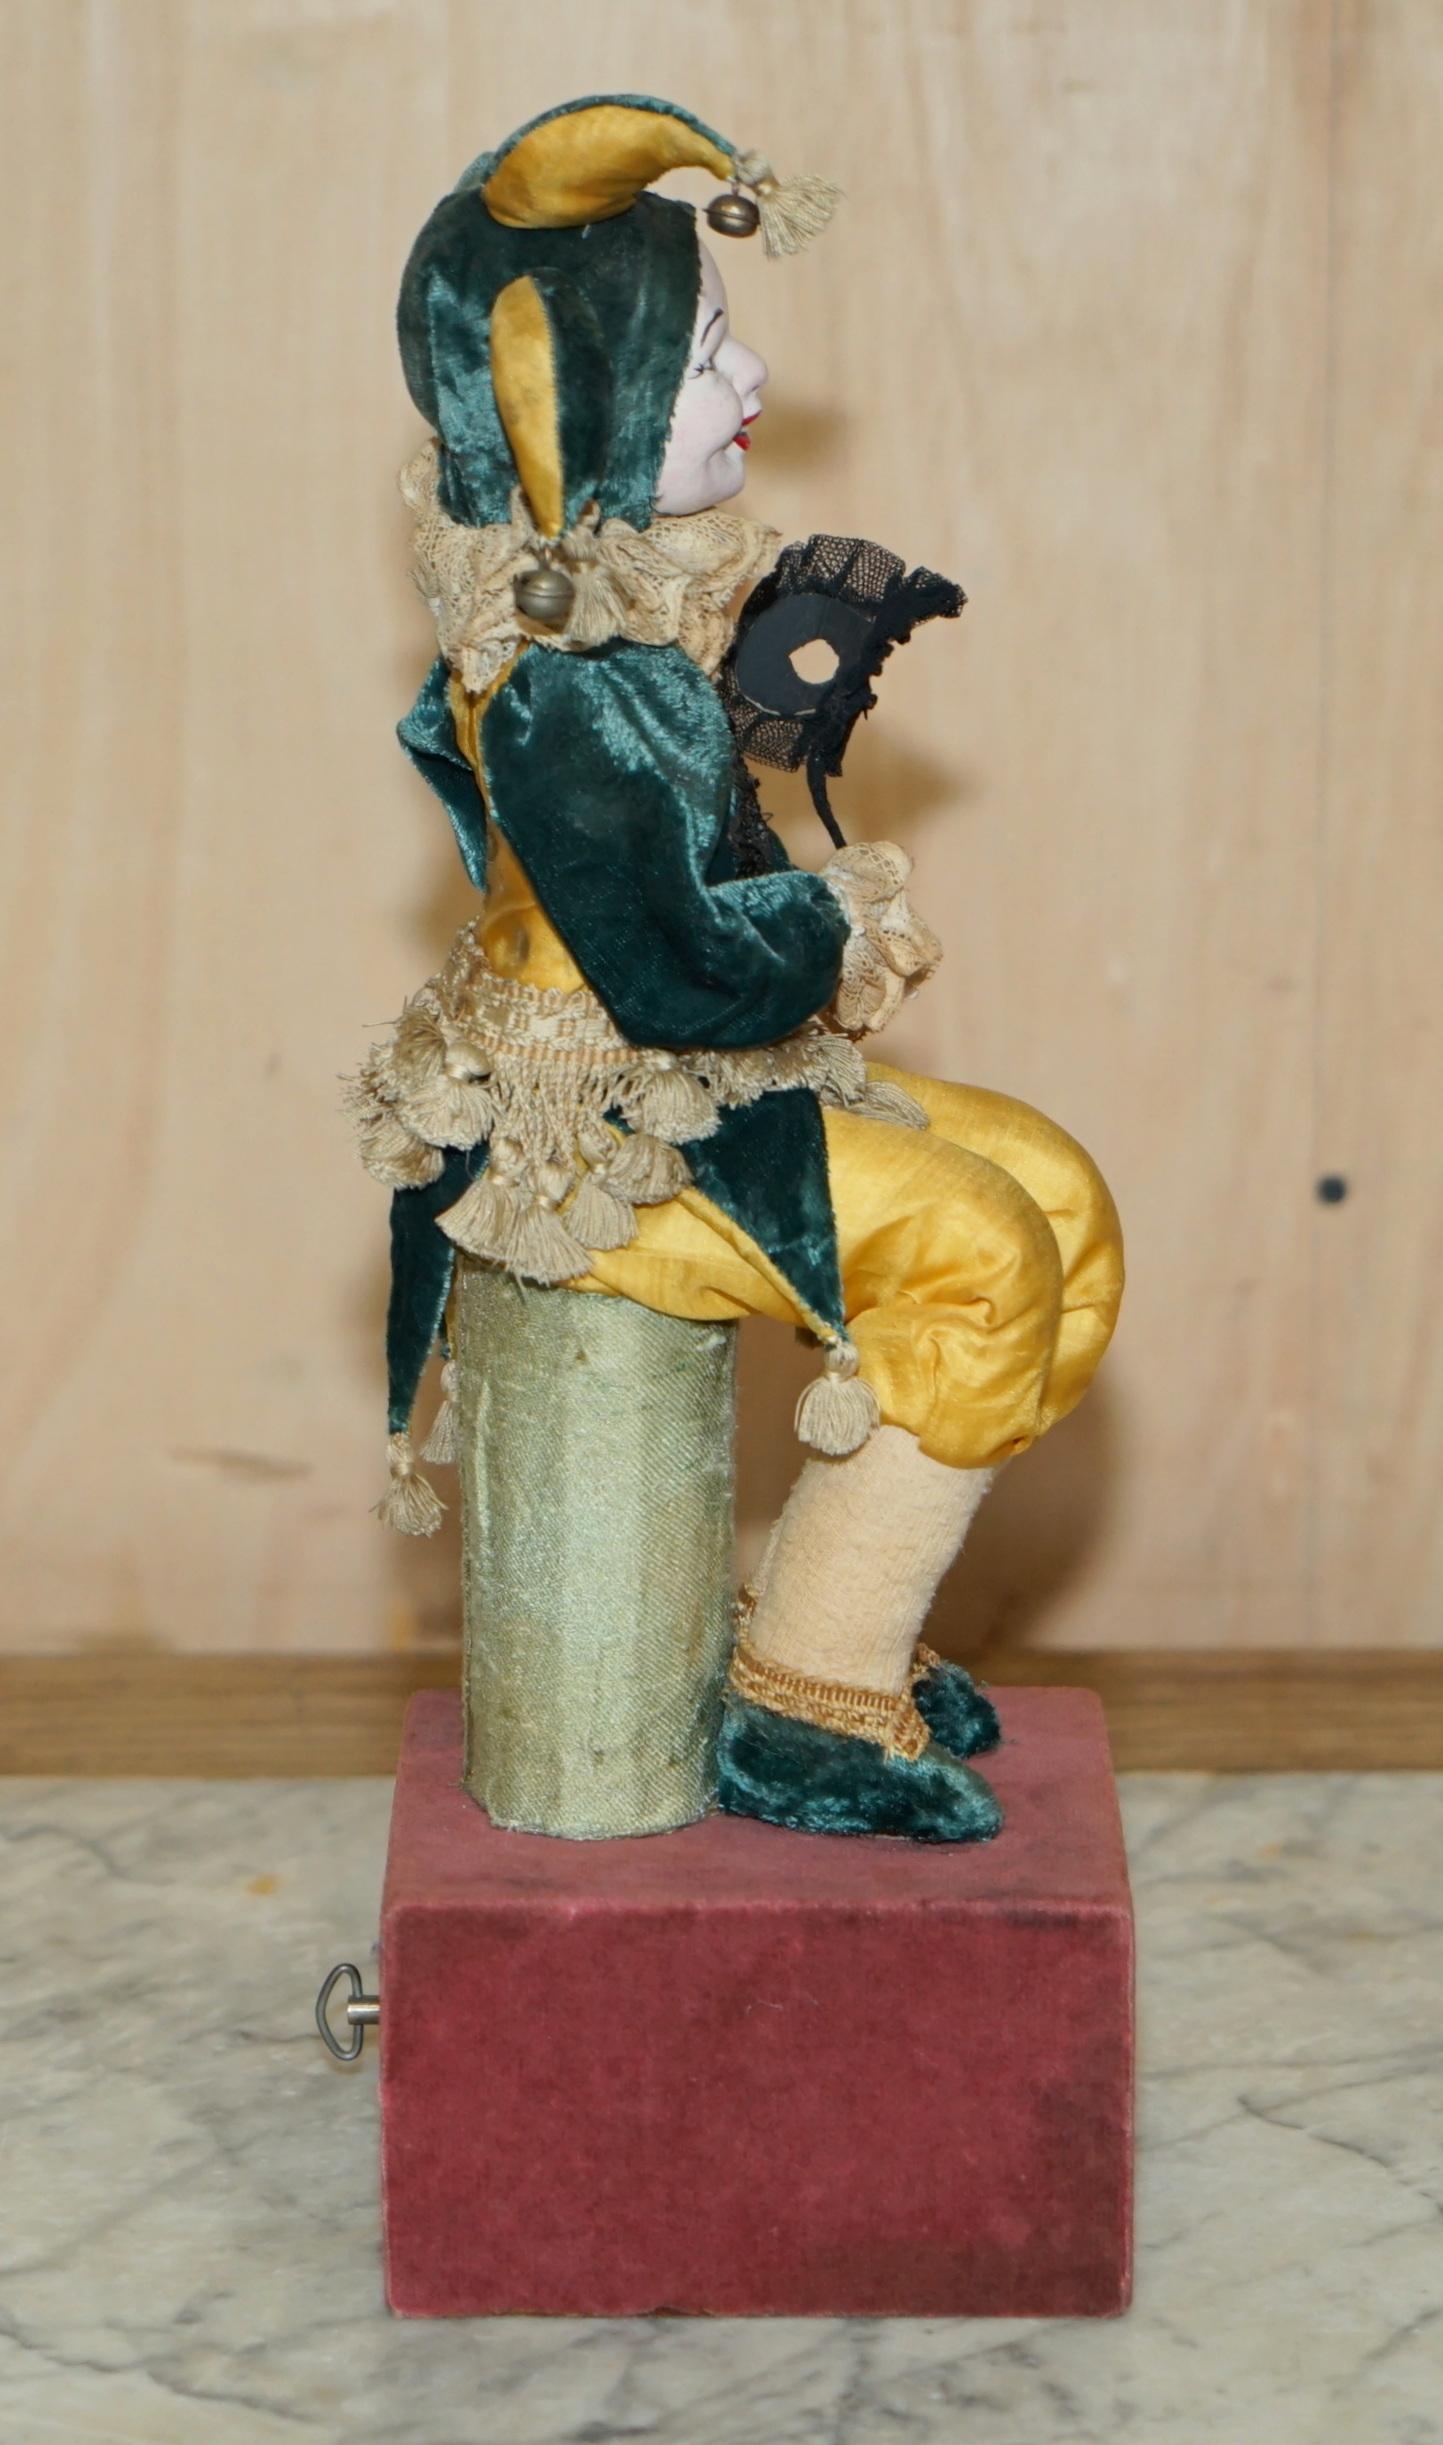 Velvet ANTiQUE FRENCH HAND MADE MUSICAL AUTOMATON JESTER CLOWN THAT PLAYS MUSIC & MOVES For Sale